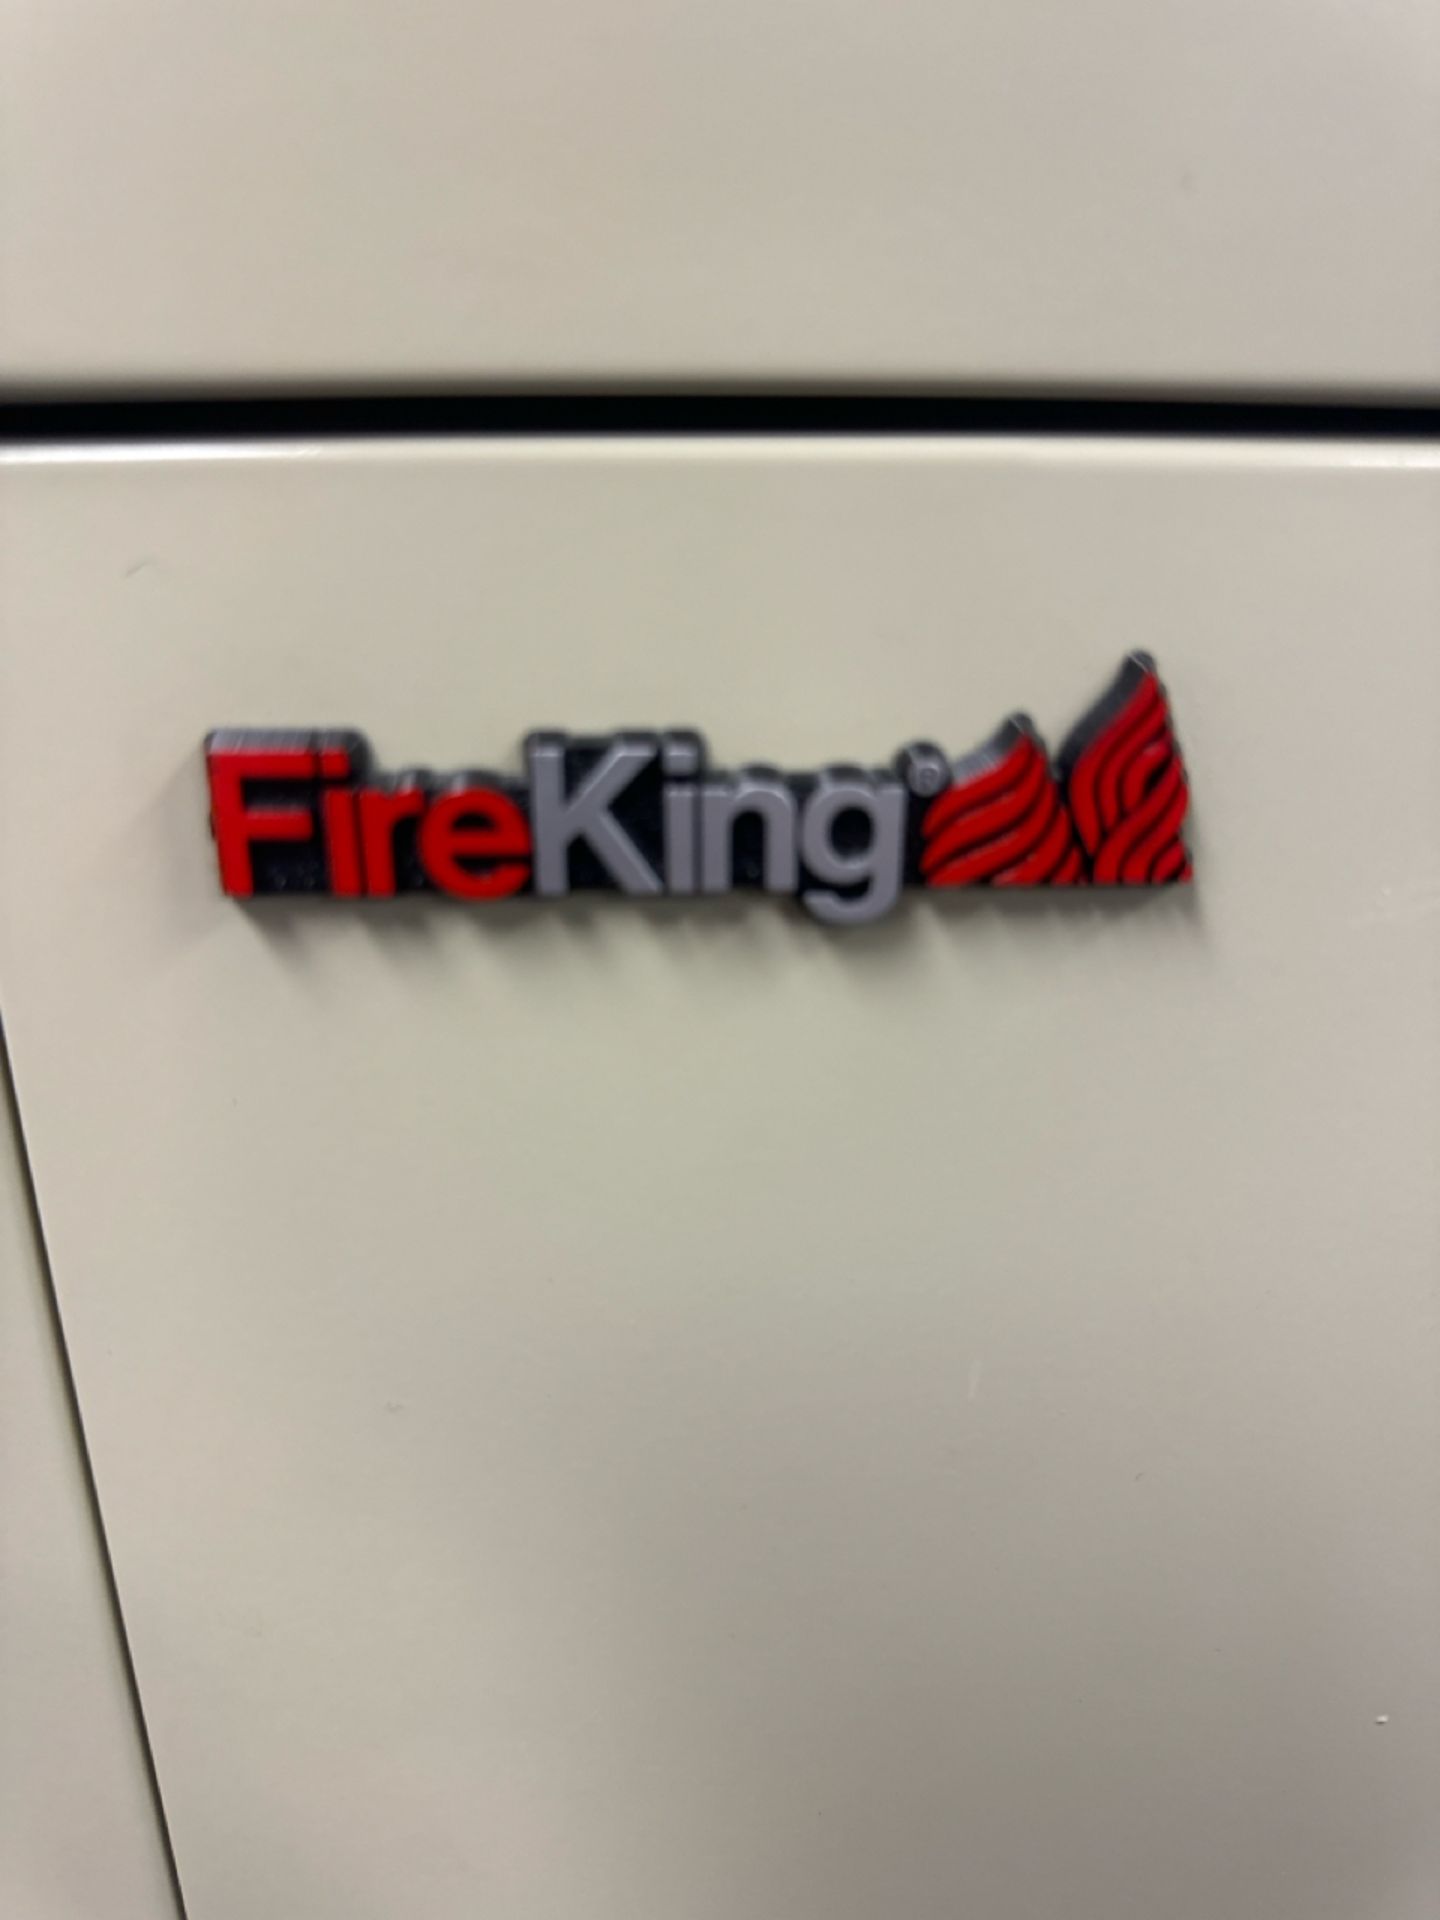 Fire King 4-Drawer Lateral File Cabinet - Image 3 of 4